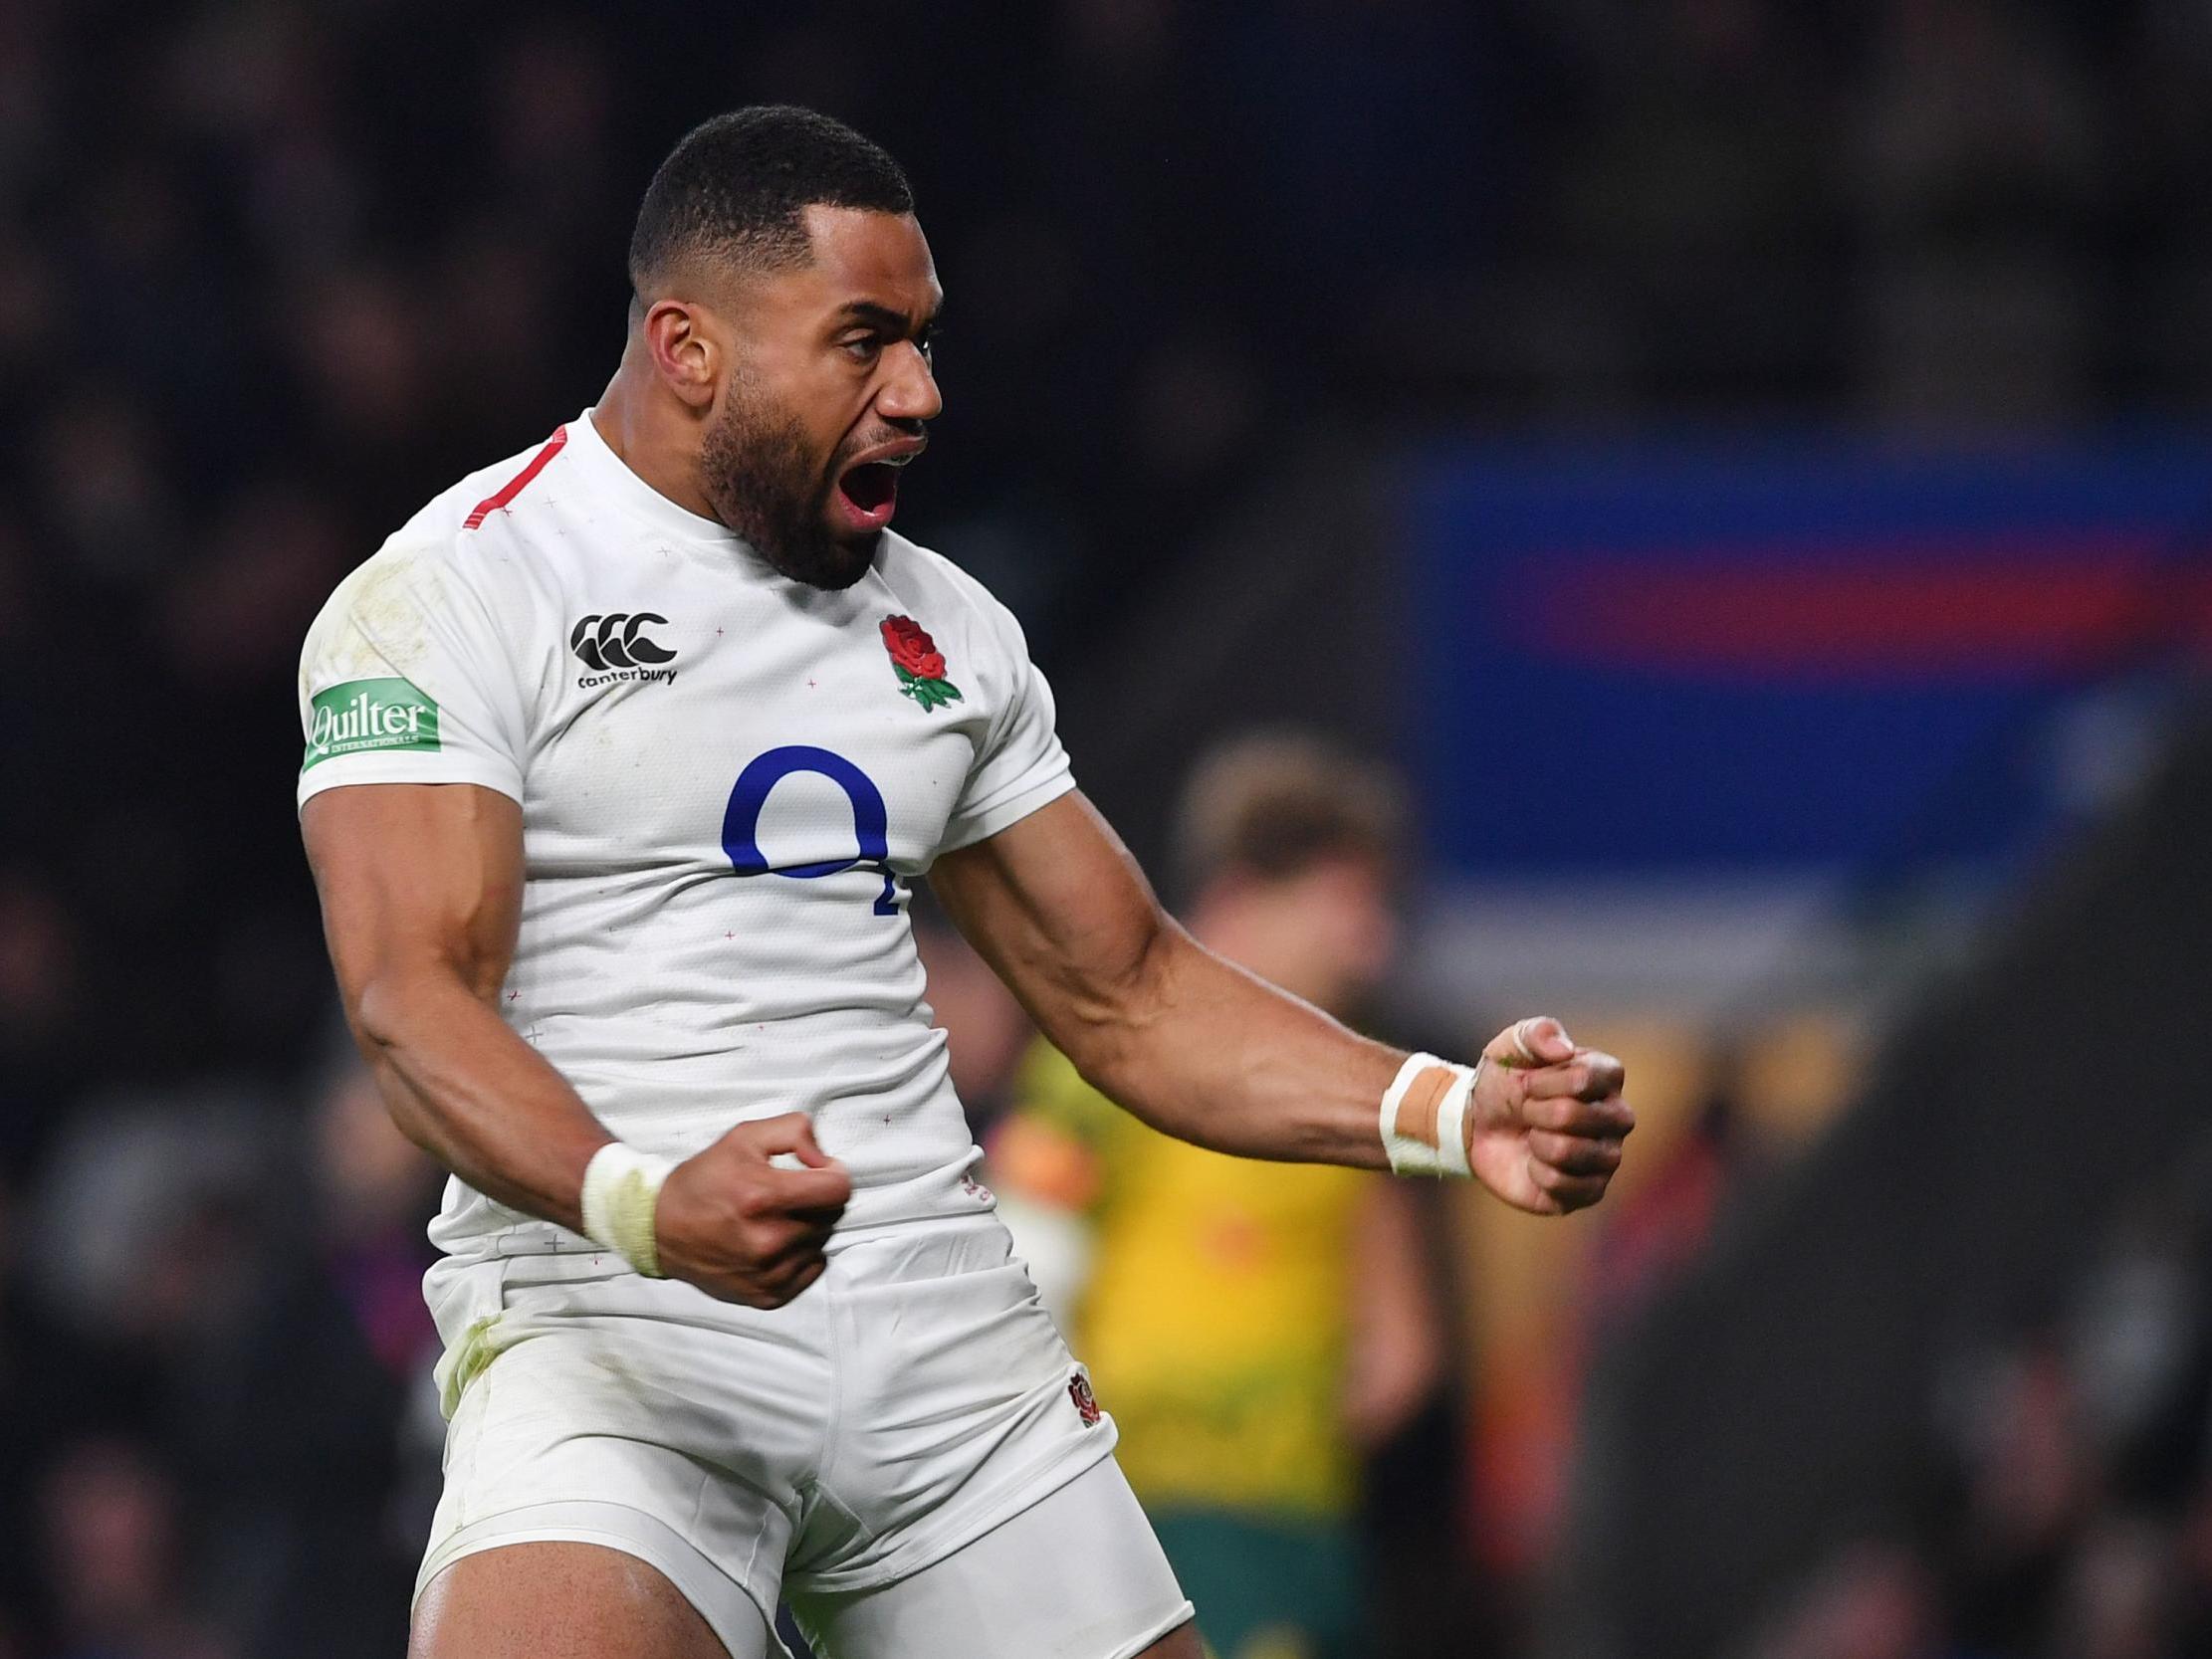 Cokanasiga scored his second try in as many tests